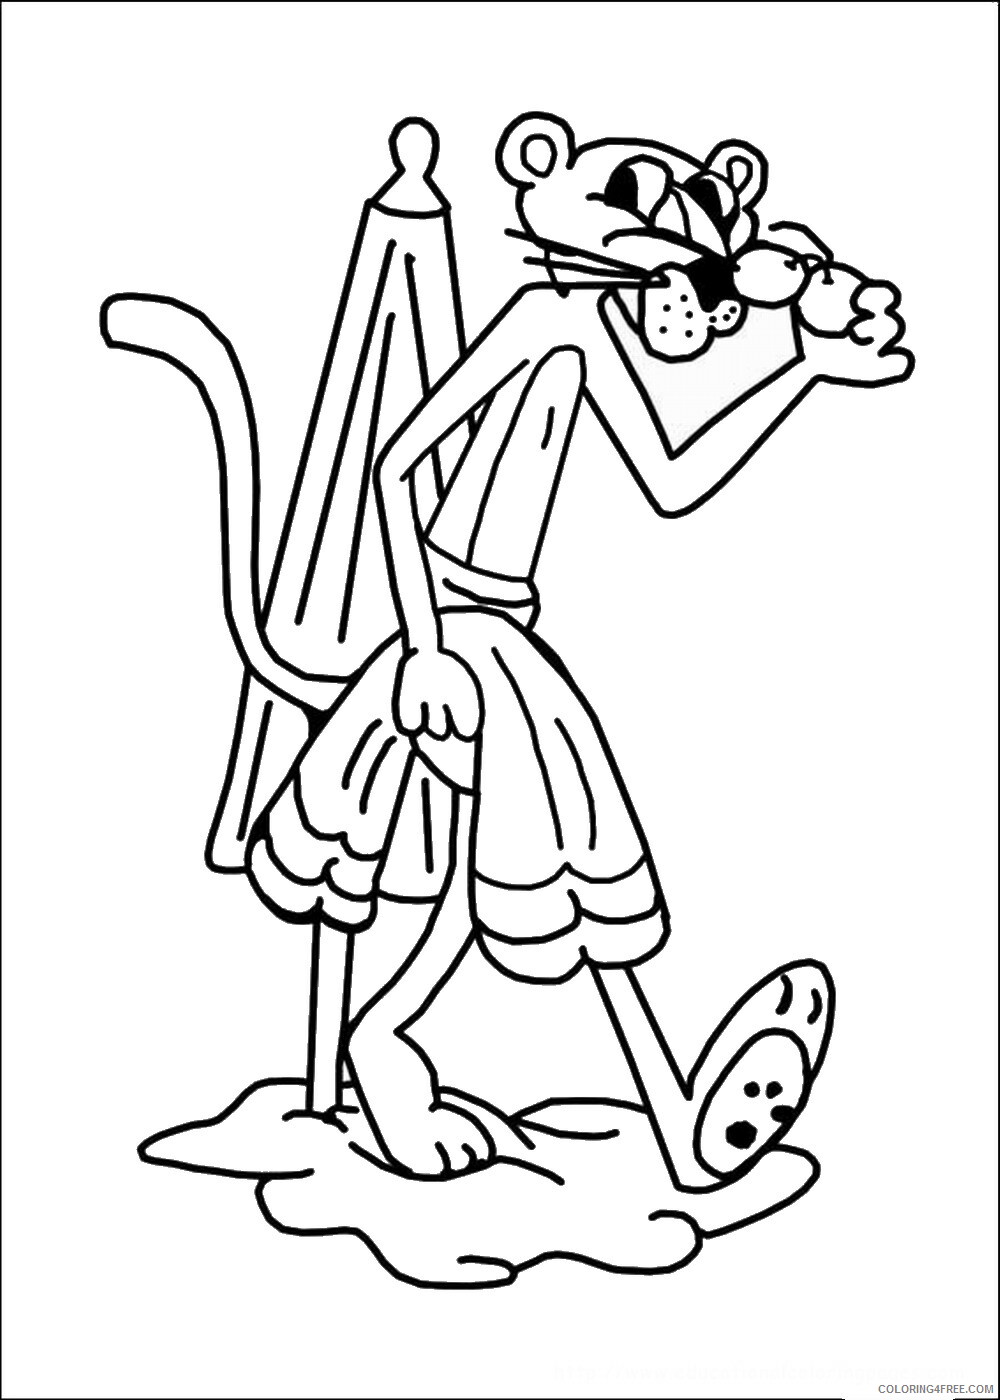 Pink Panther Coloring Pages TV Film pink_panther_cl_14 Printable 2020 06267 Coloring4free